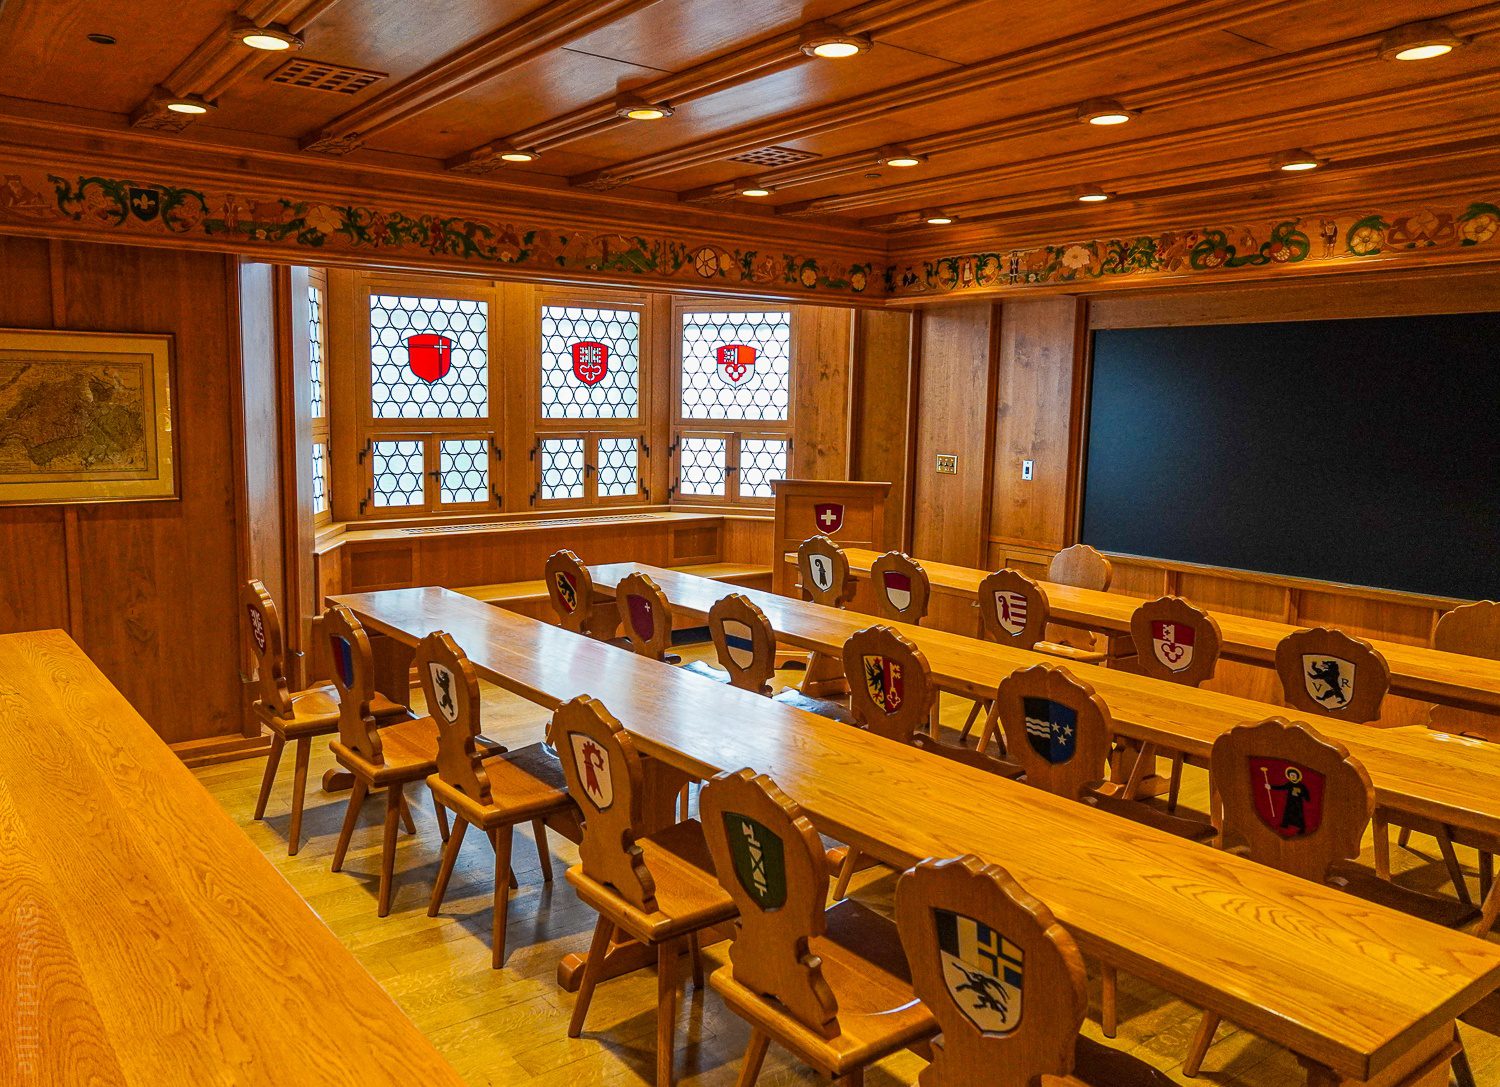 The Swiss Room in the Cathedral of Learning.